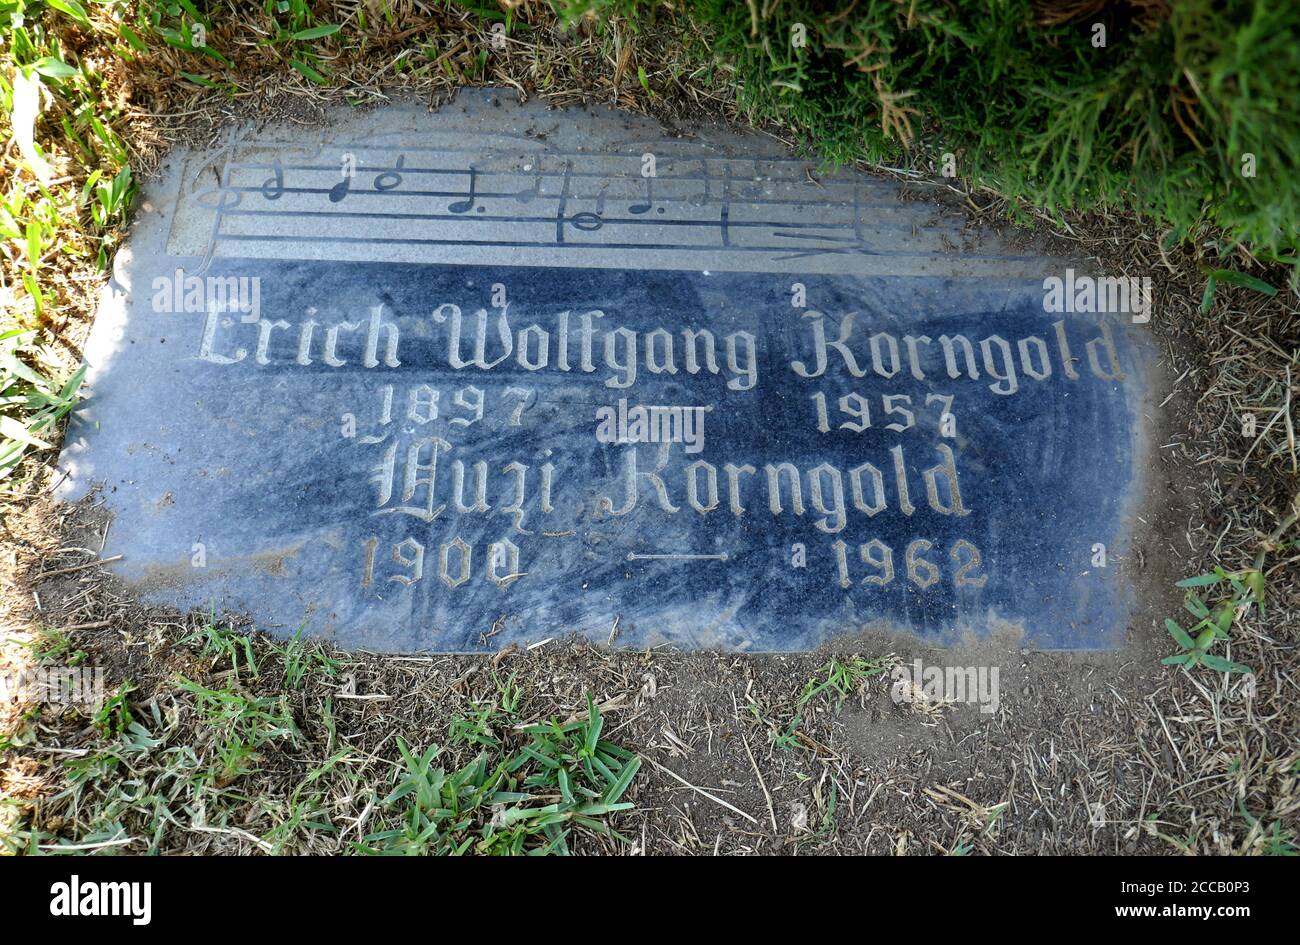 Hollywood, California, USA 13th August 2020 A general view of atmosphere of composer Erich Wolfgang Korngold's grave at Hollywood Forever Cemetery on August 13, 2020 in Hollywood, California, USA. Photo by Barry King/Alamy Stock Photo Stock Photo